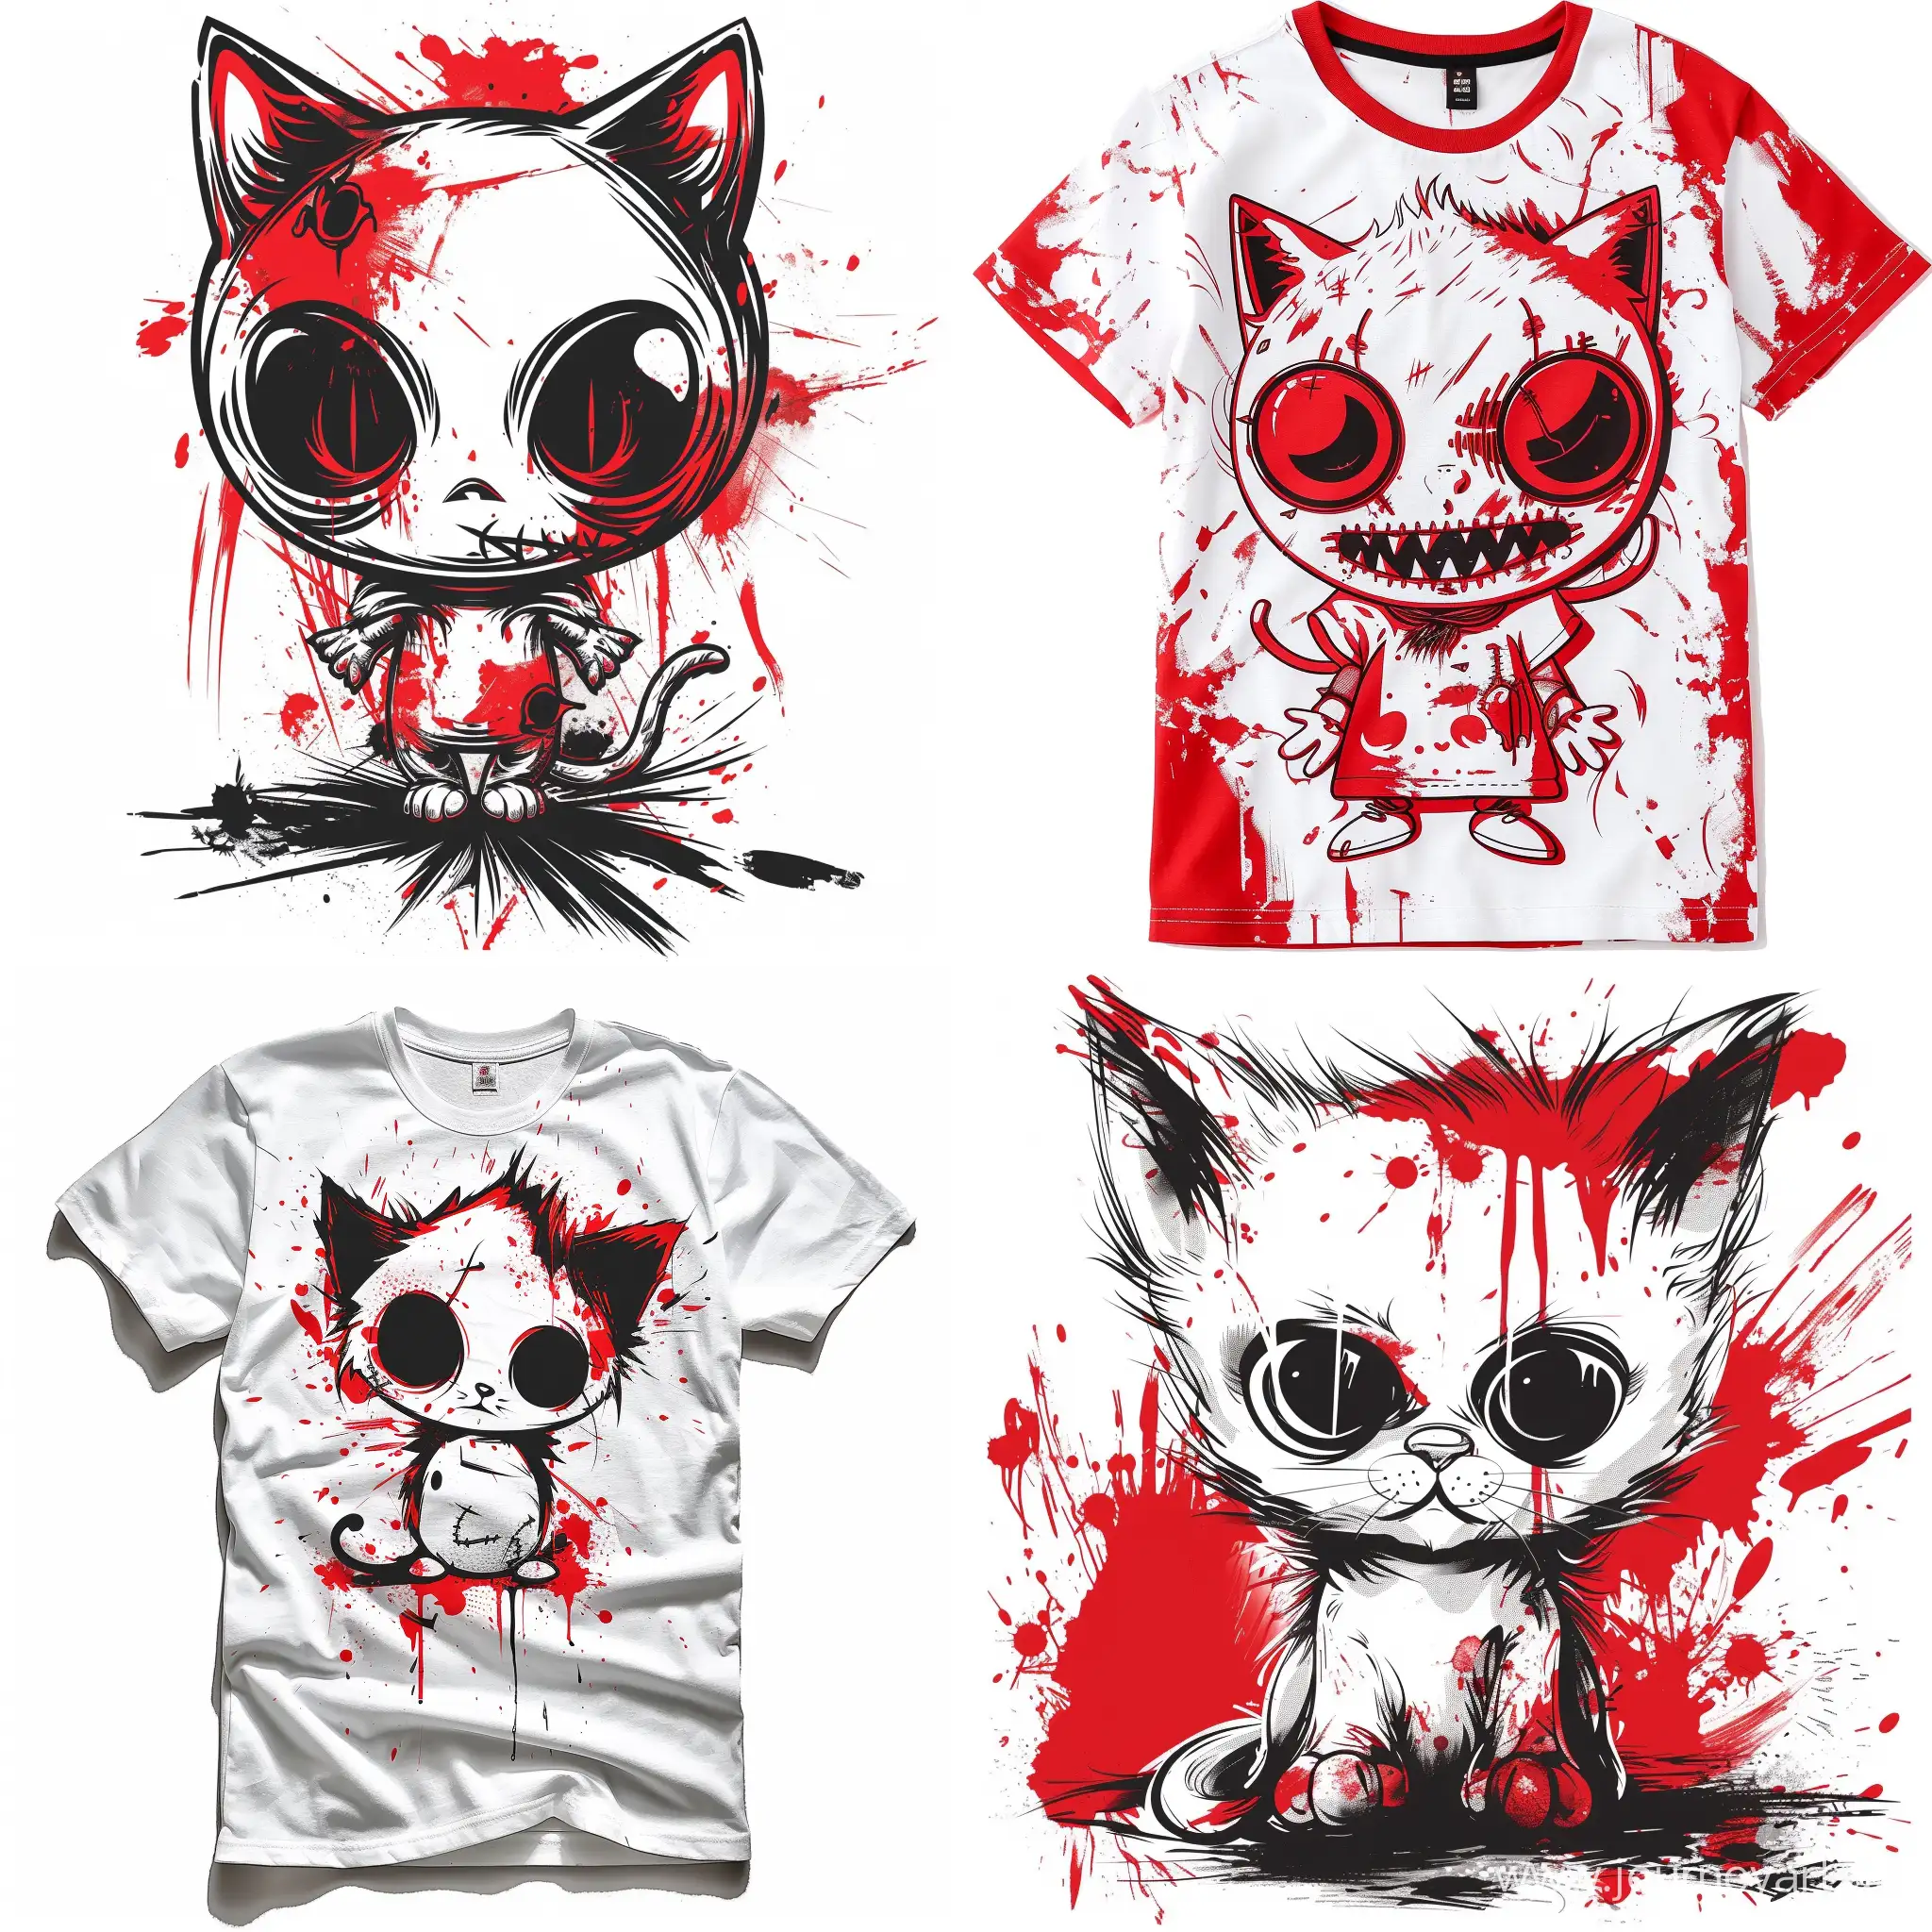 Raw-Cartoon-Killer-Cat-Doll-Punk-Design-TShirt-in-Red-and-White